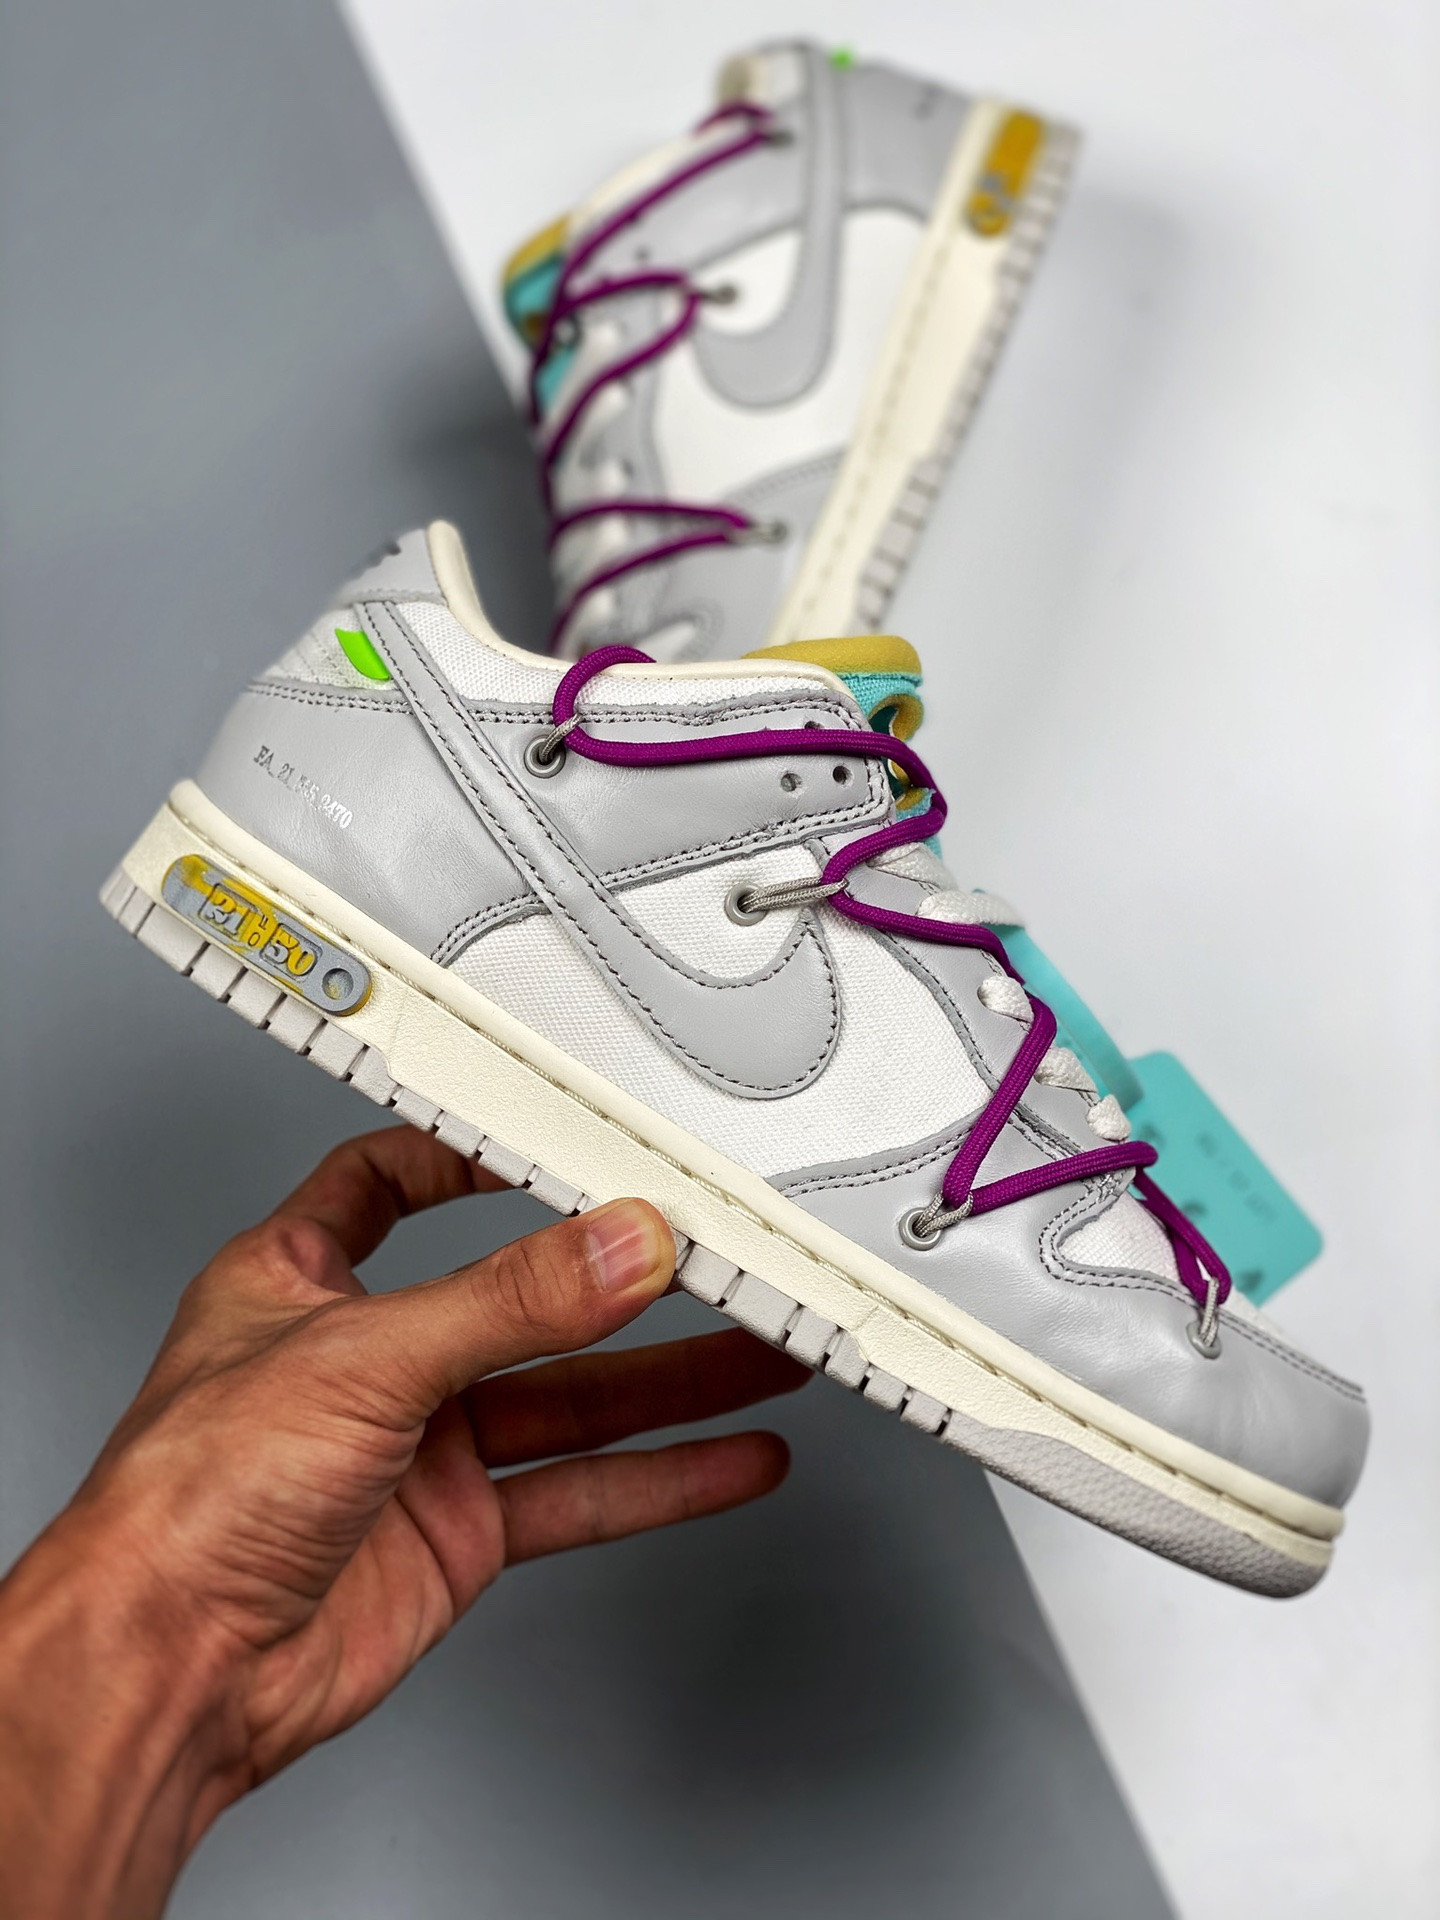 Off-White x Nike Dunk Low 21 of 50 Sail Grey Green For Sale